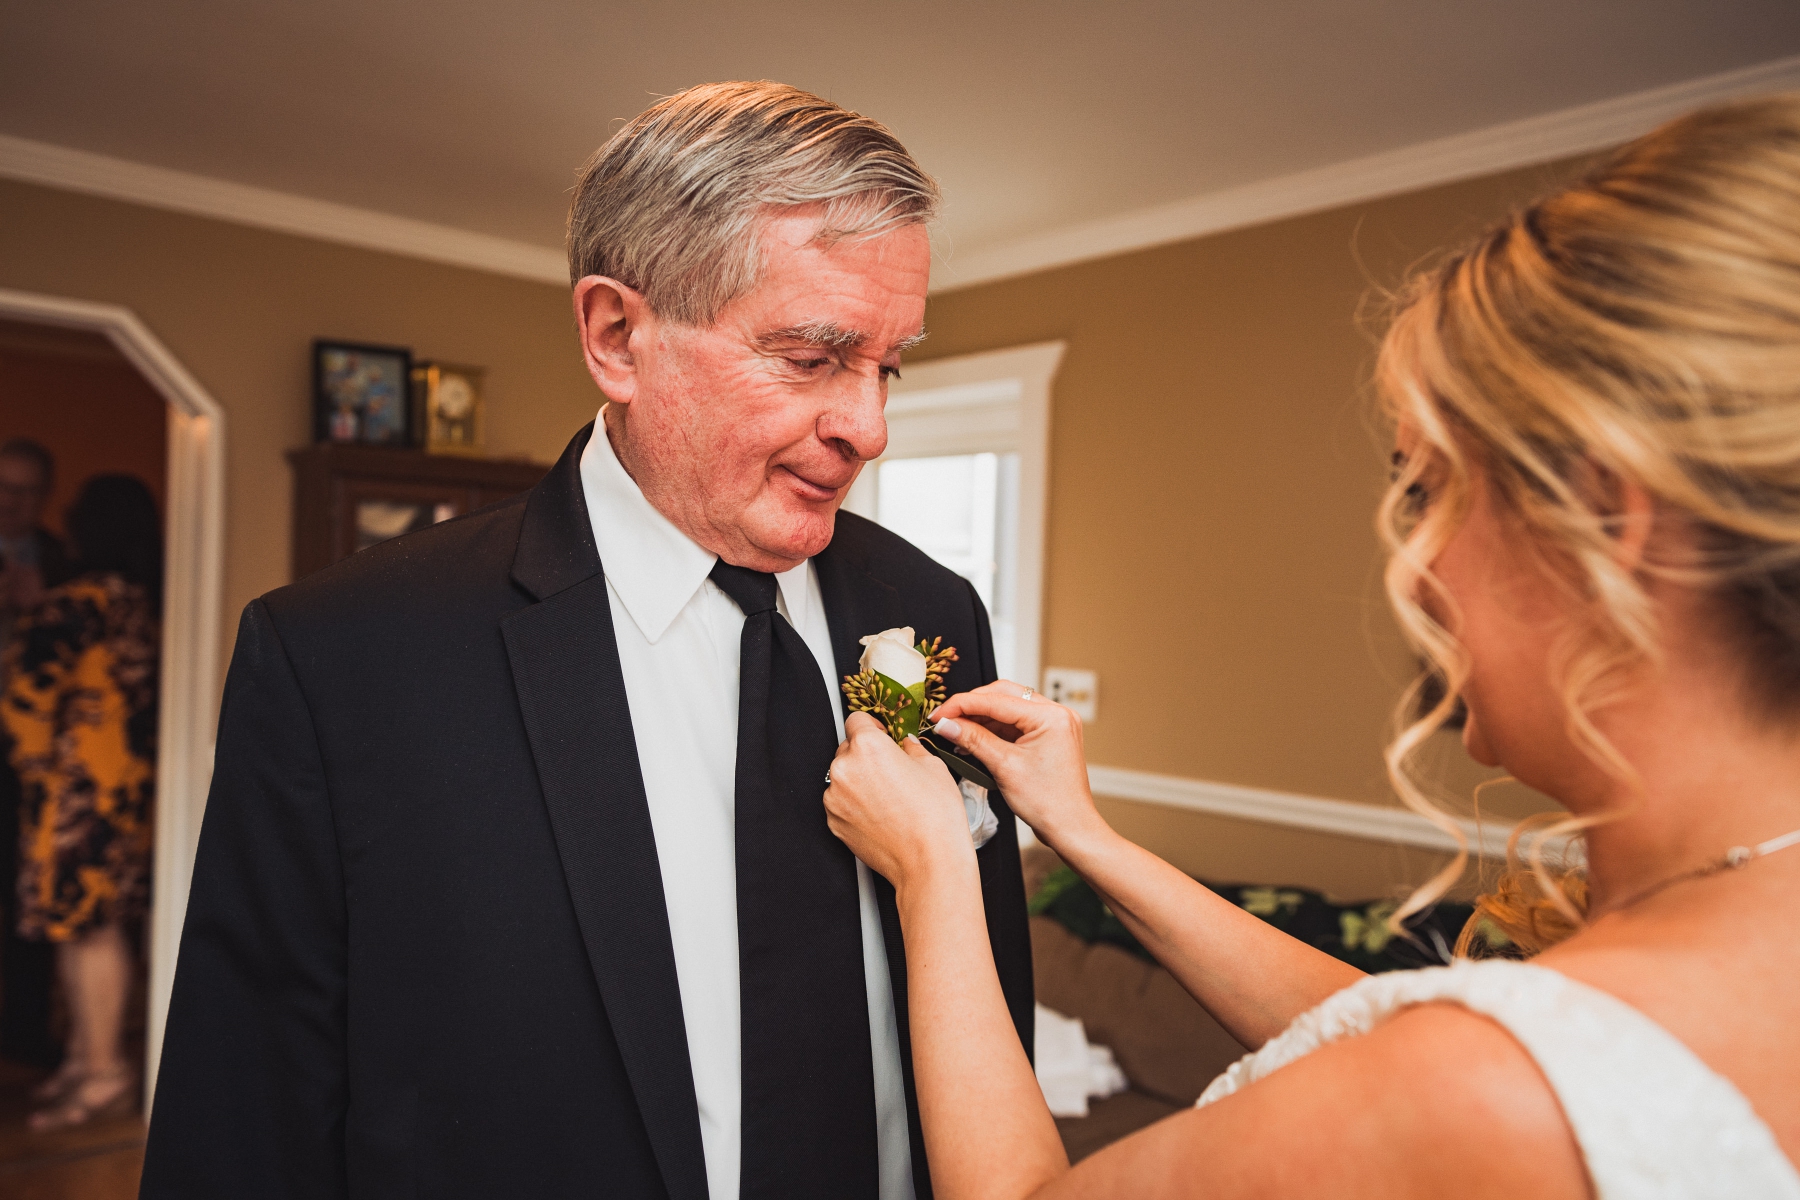  Flowers for dad? always necessary, and always a touching moment. The dad is the main subject here. 